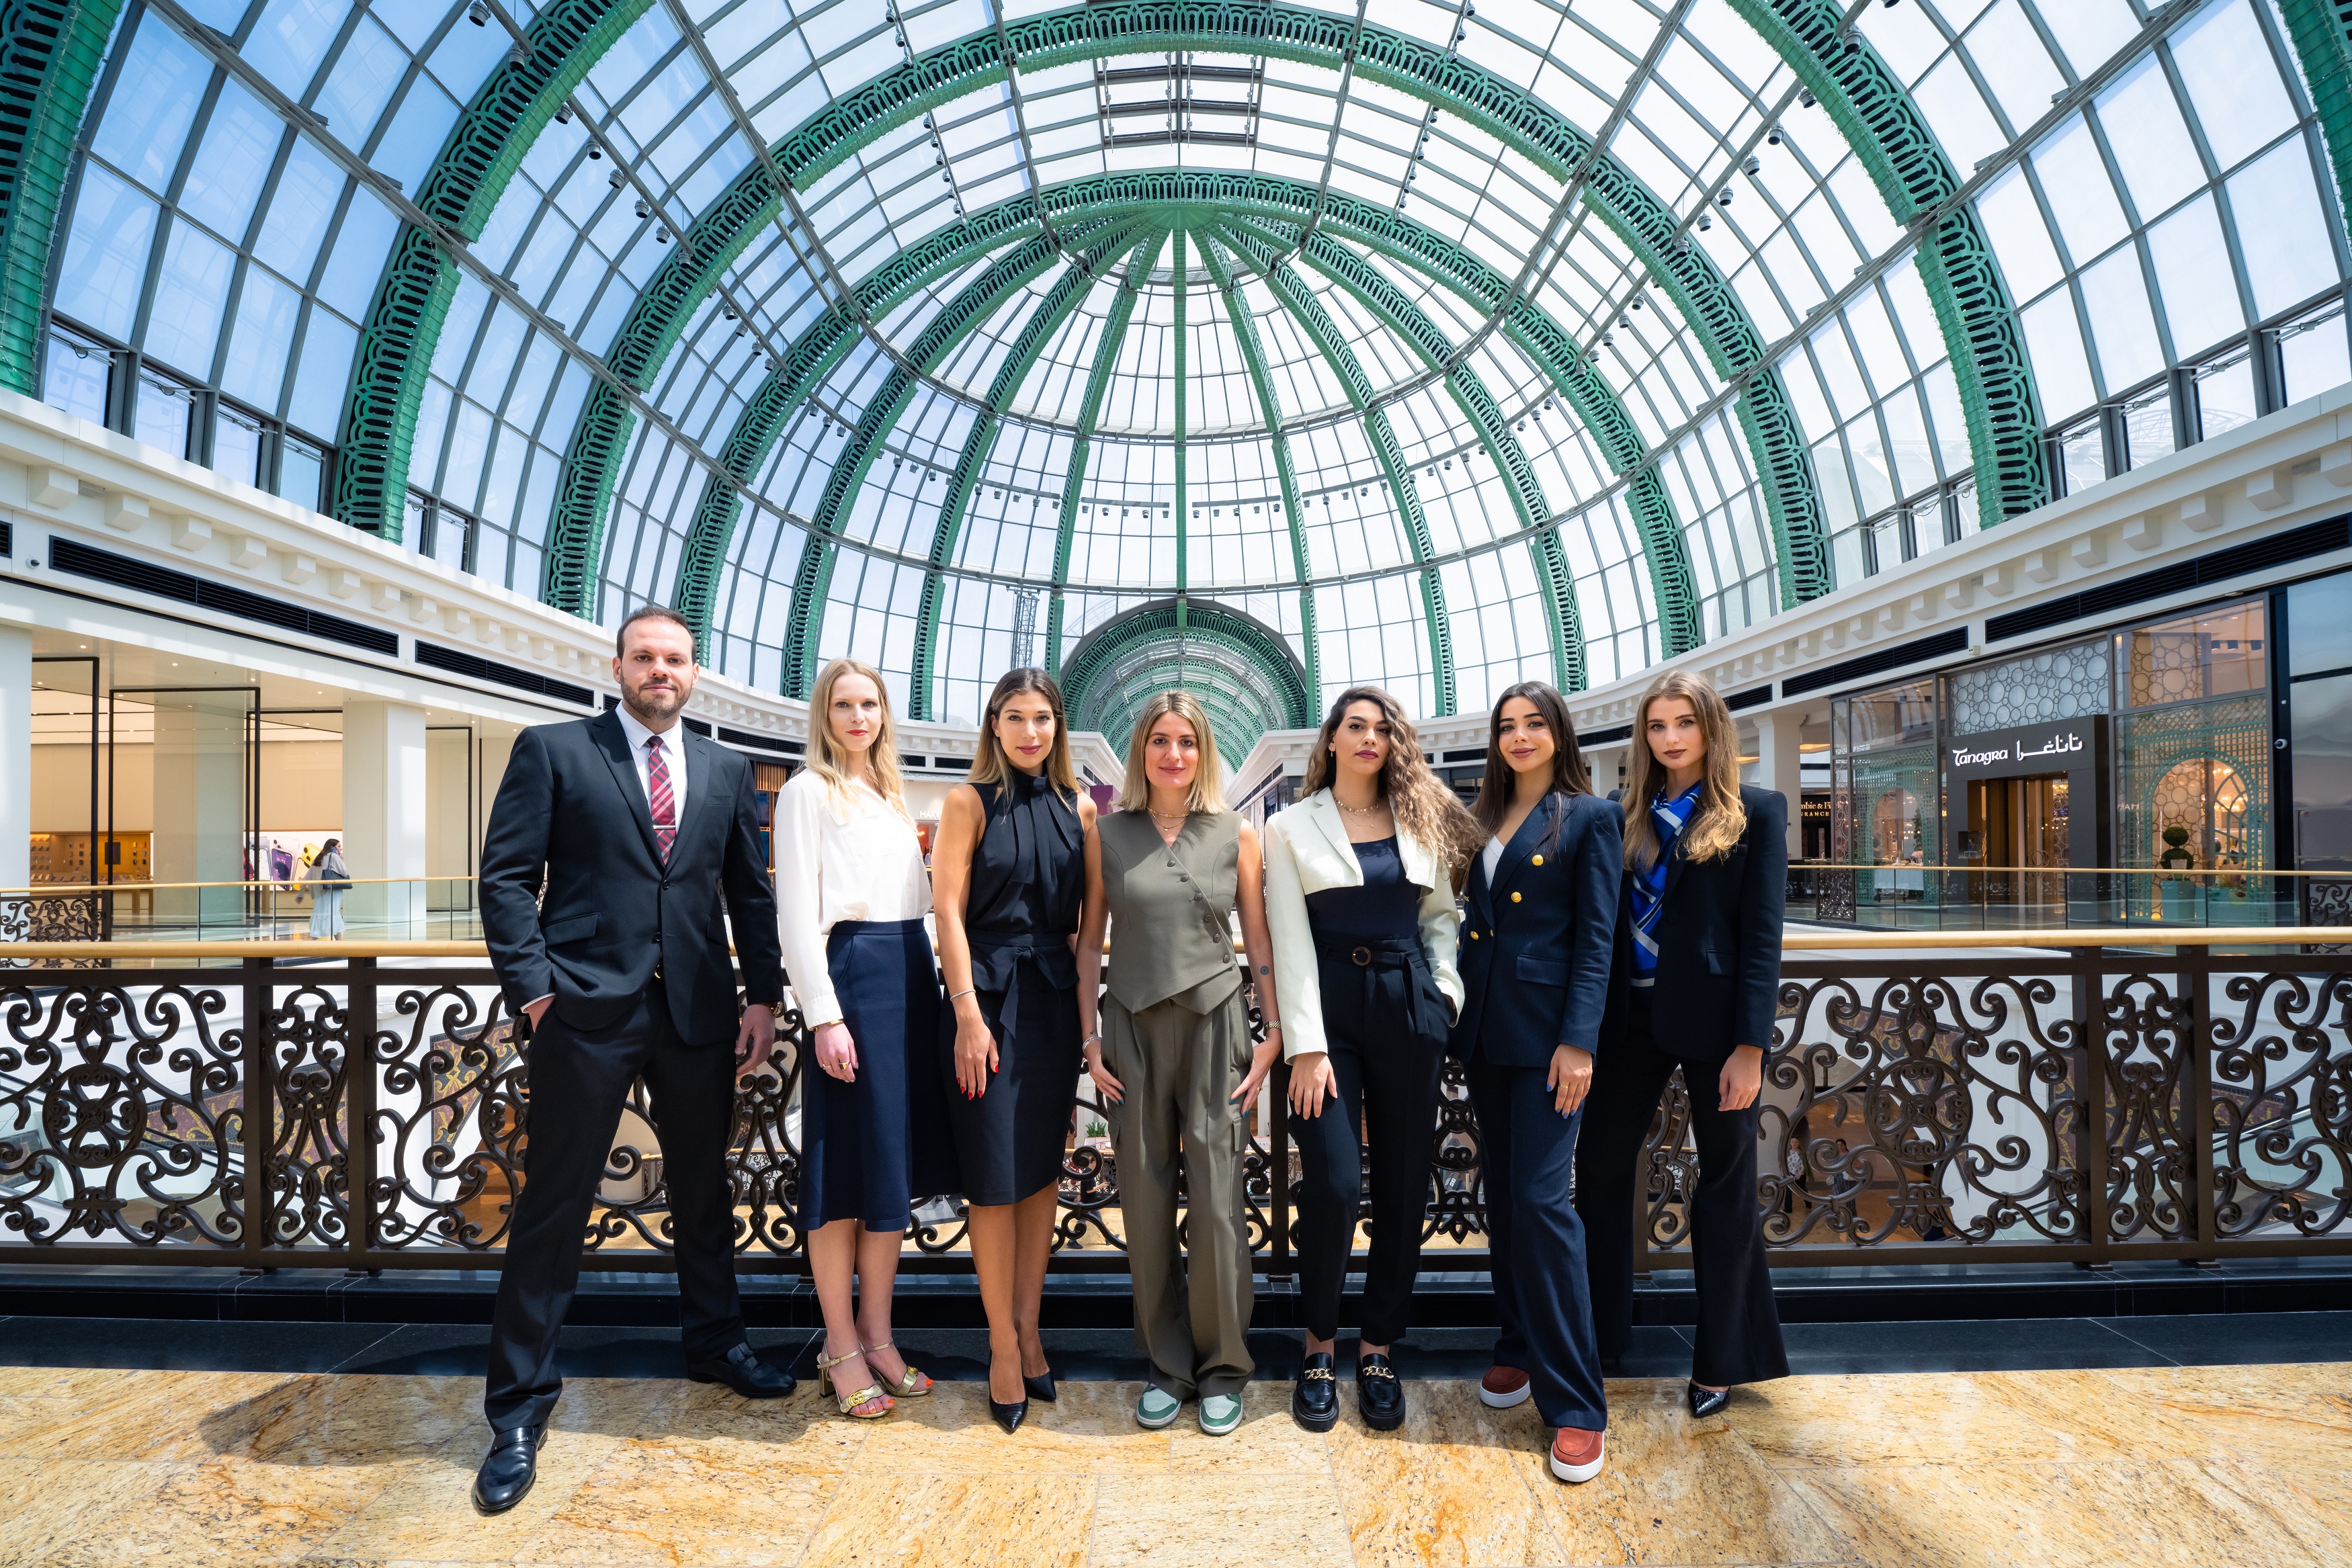 Maisons du Monde opened a second franchise store in Dubaï, in partnership  with Majid Al Futtaim